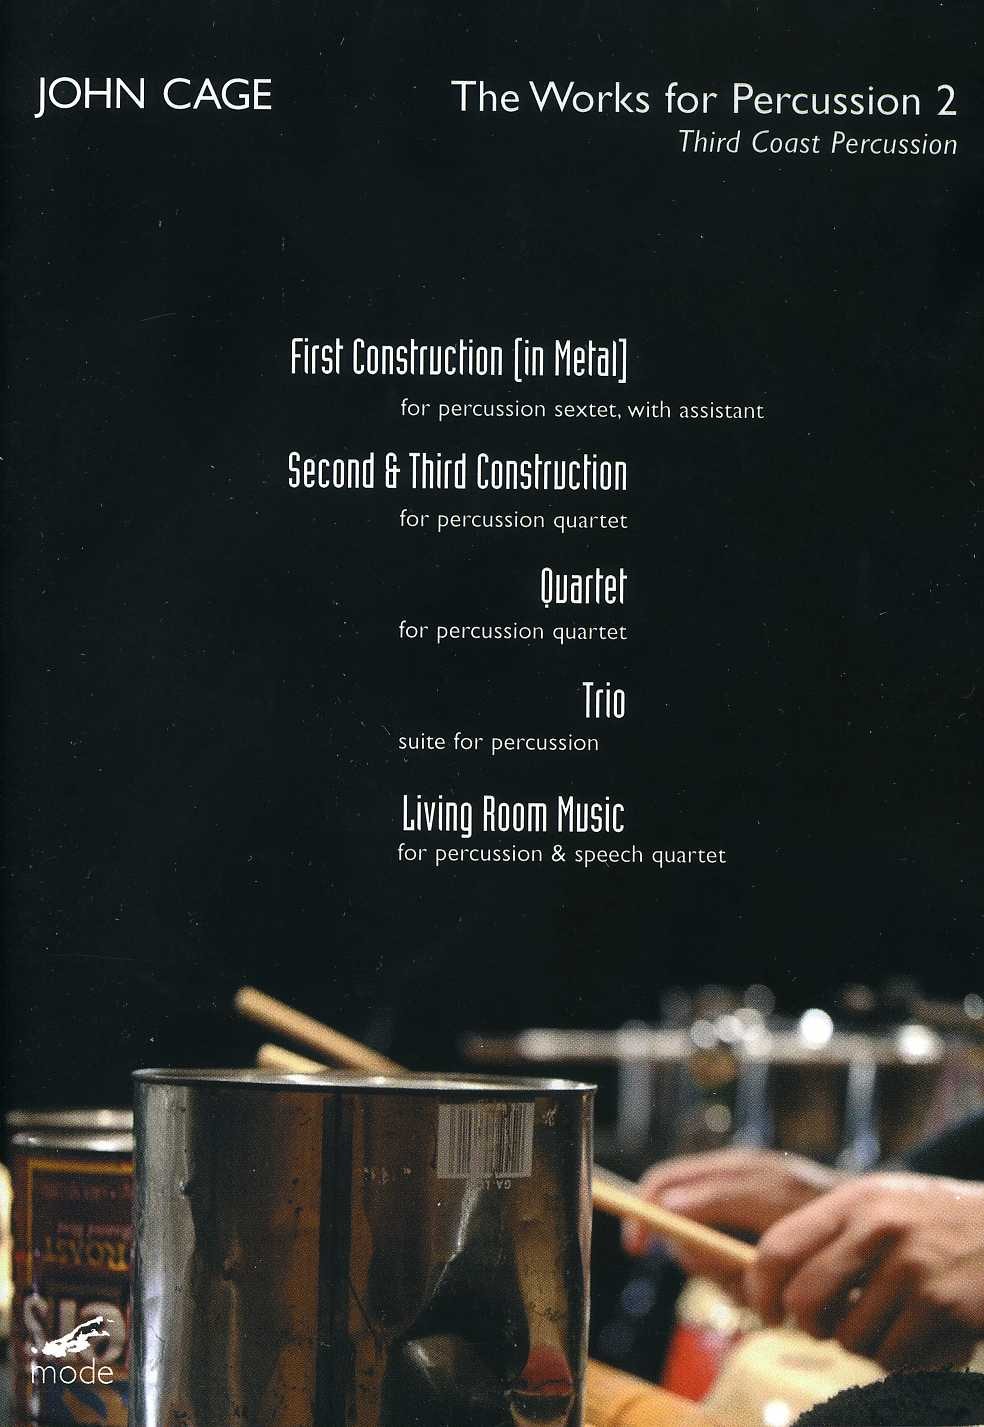 John Cage WORKS FOR PERCUSSION 2 DVD $34.99$31.49